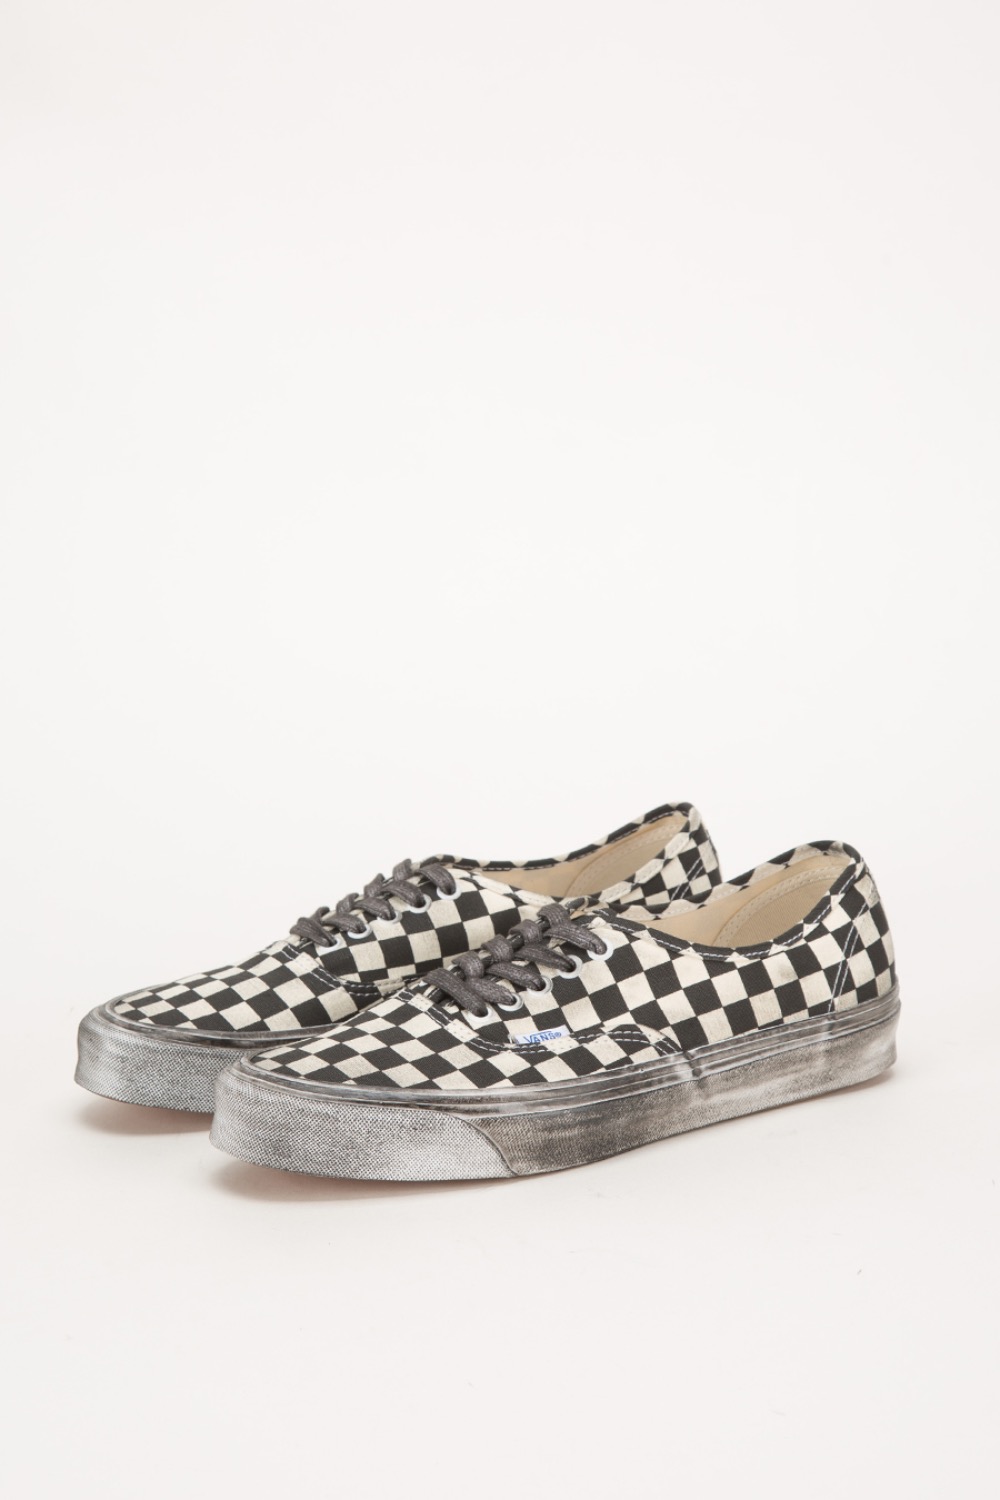 OG AUTHENTIC LX STRESSED BLACK/CHECKERBOARD